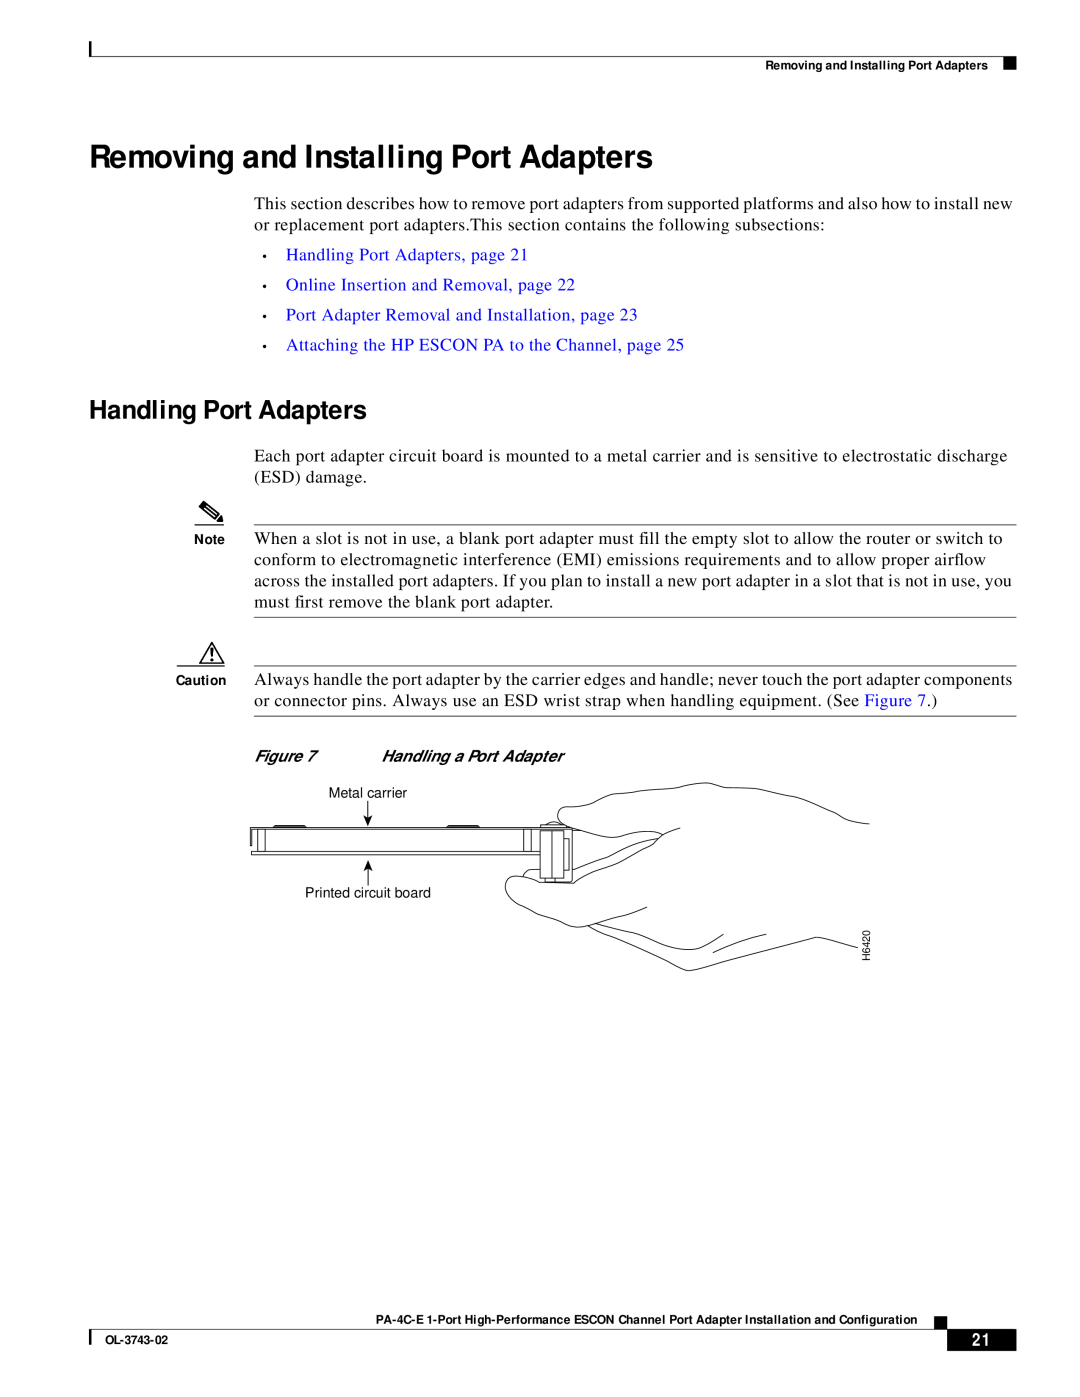 Cisco Systems PA-4C-E 1 manual Removing and Installing Port Adapters, Handling Port Adapters 